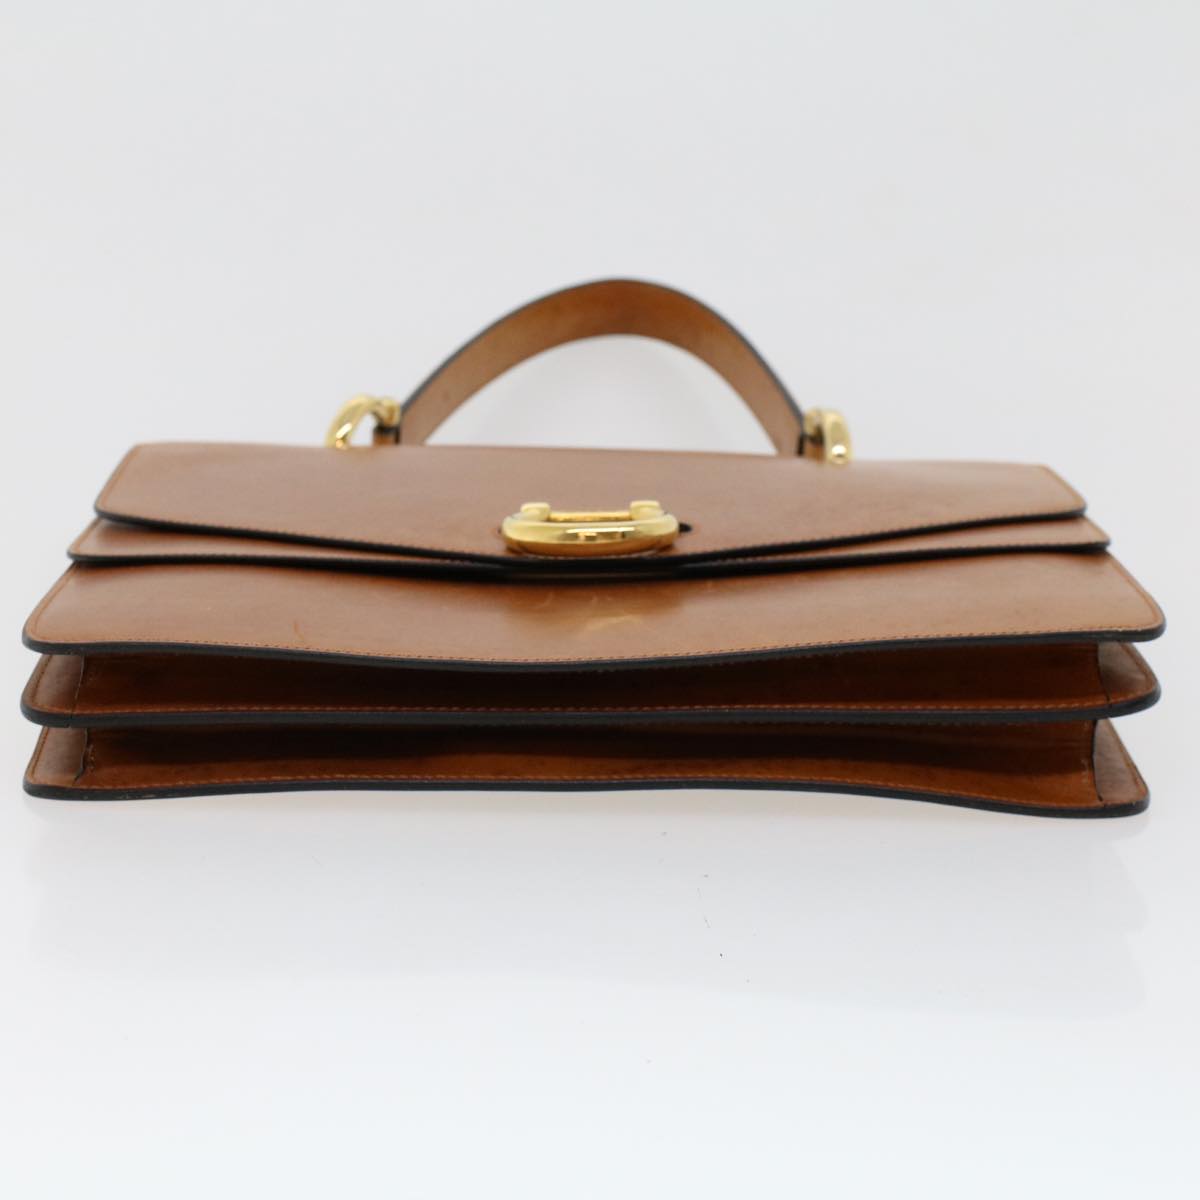 CELINE Hand Bag Leather Brown Auth bs6244